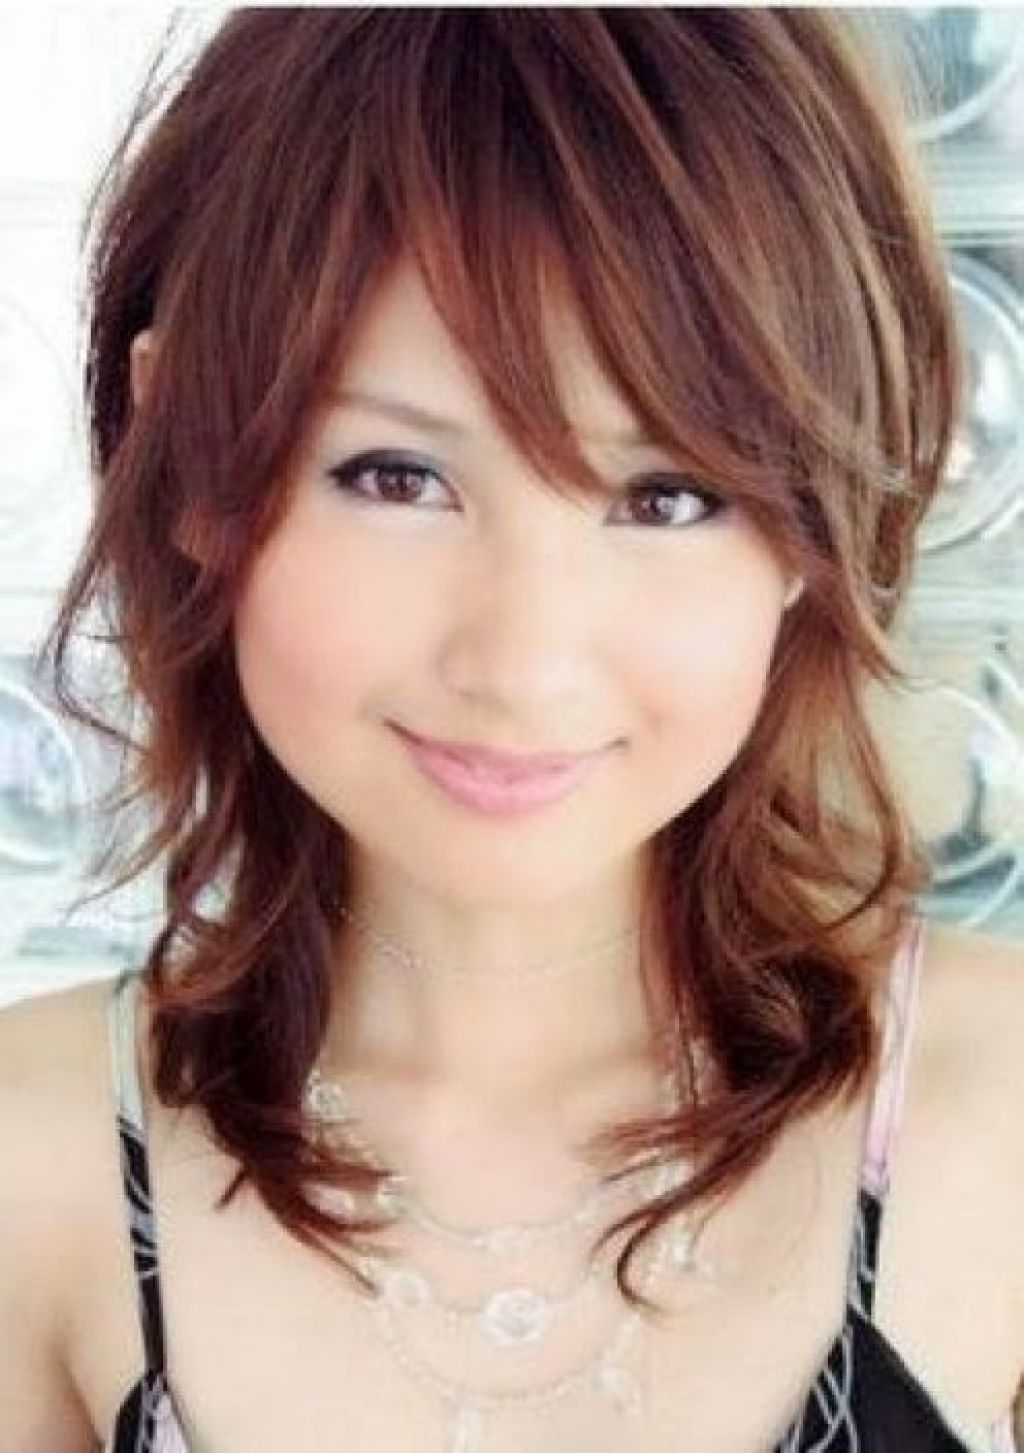 Current Shaggy Hairstyles For Round Faces Within Japanese Hairstyle Round Face – Long Hairstyle Galleries (View 4 of 15)